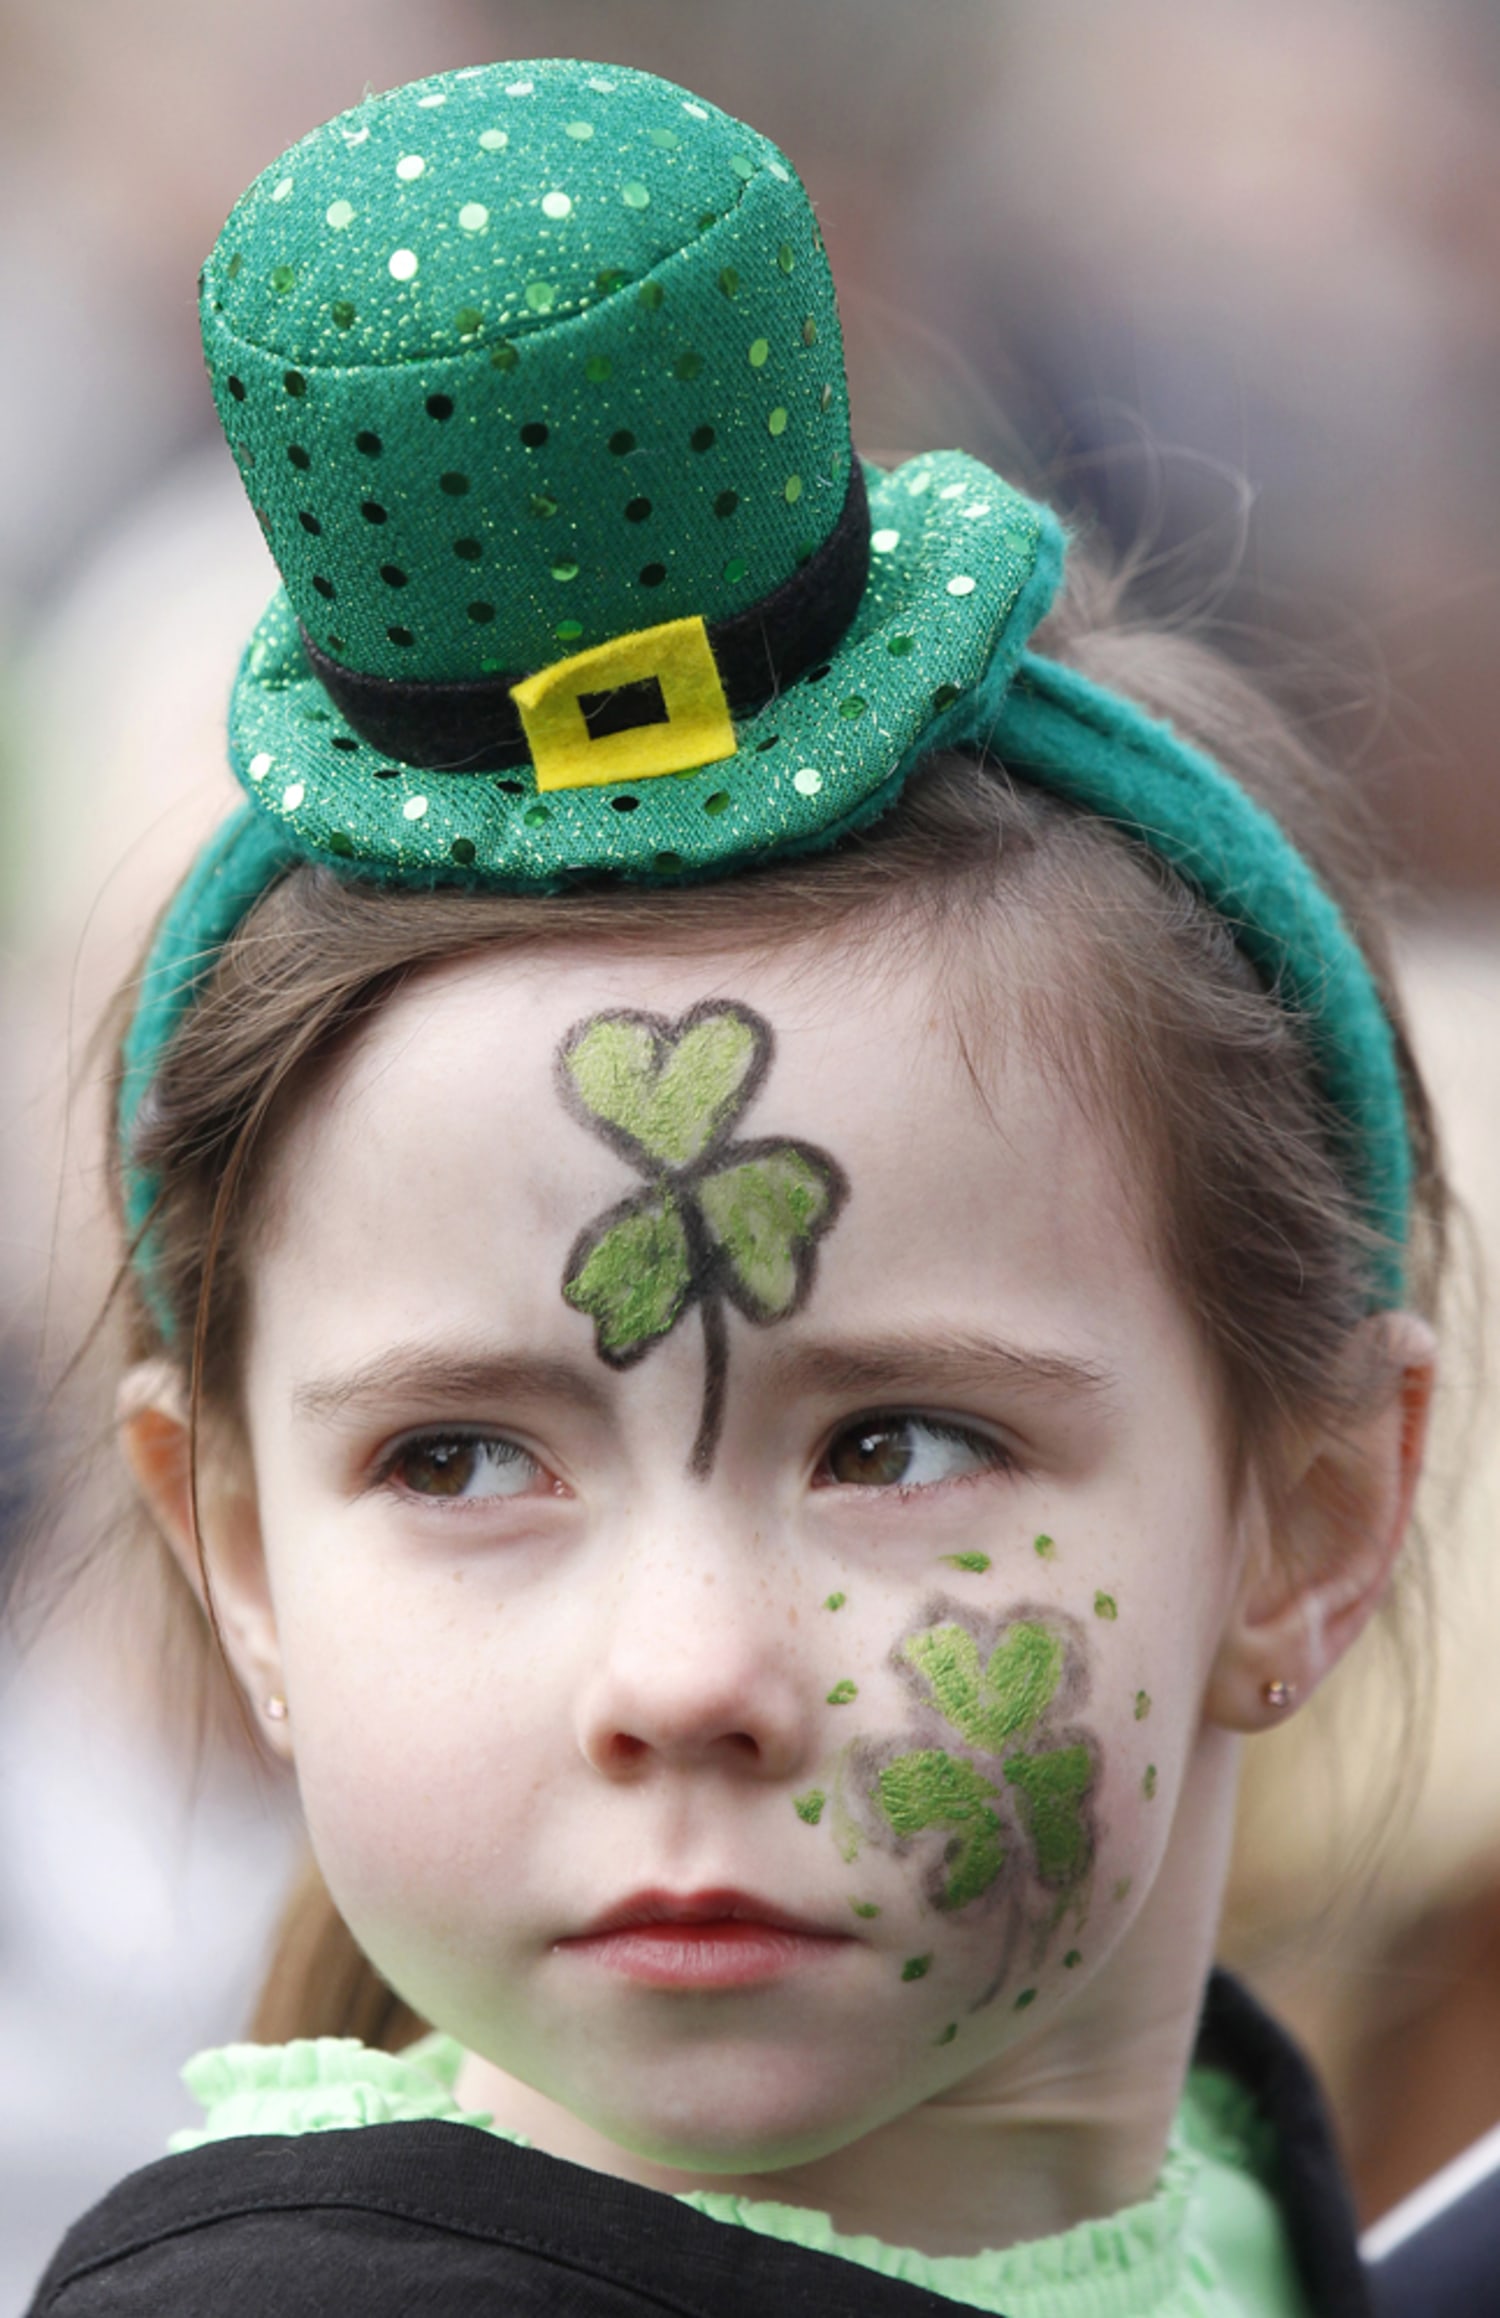 pretty green face painting, great for St. Patrick's Day